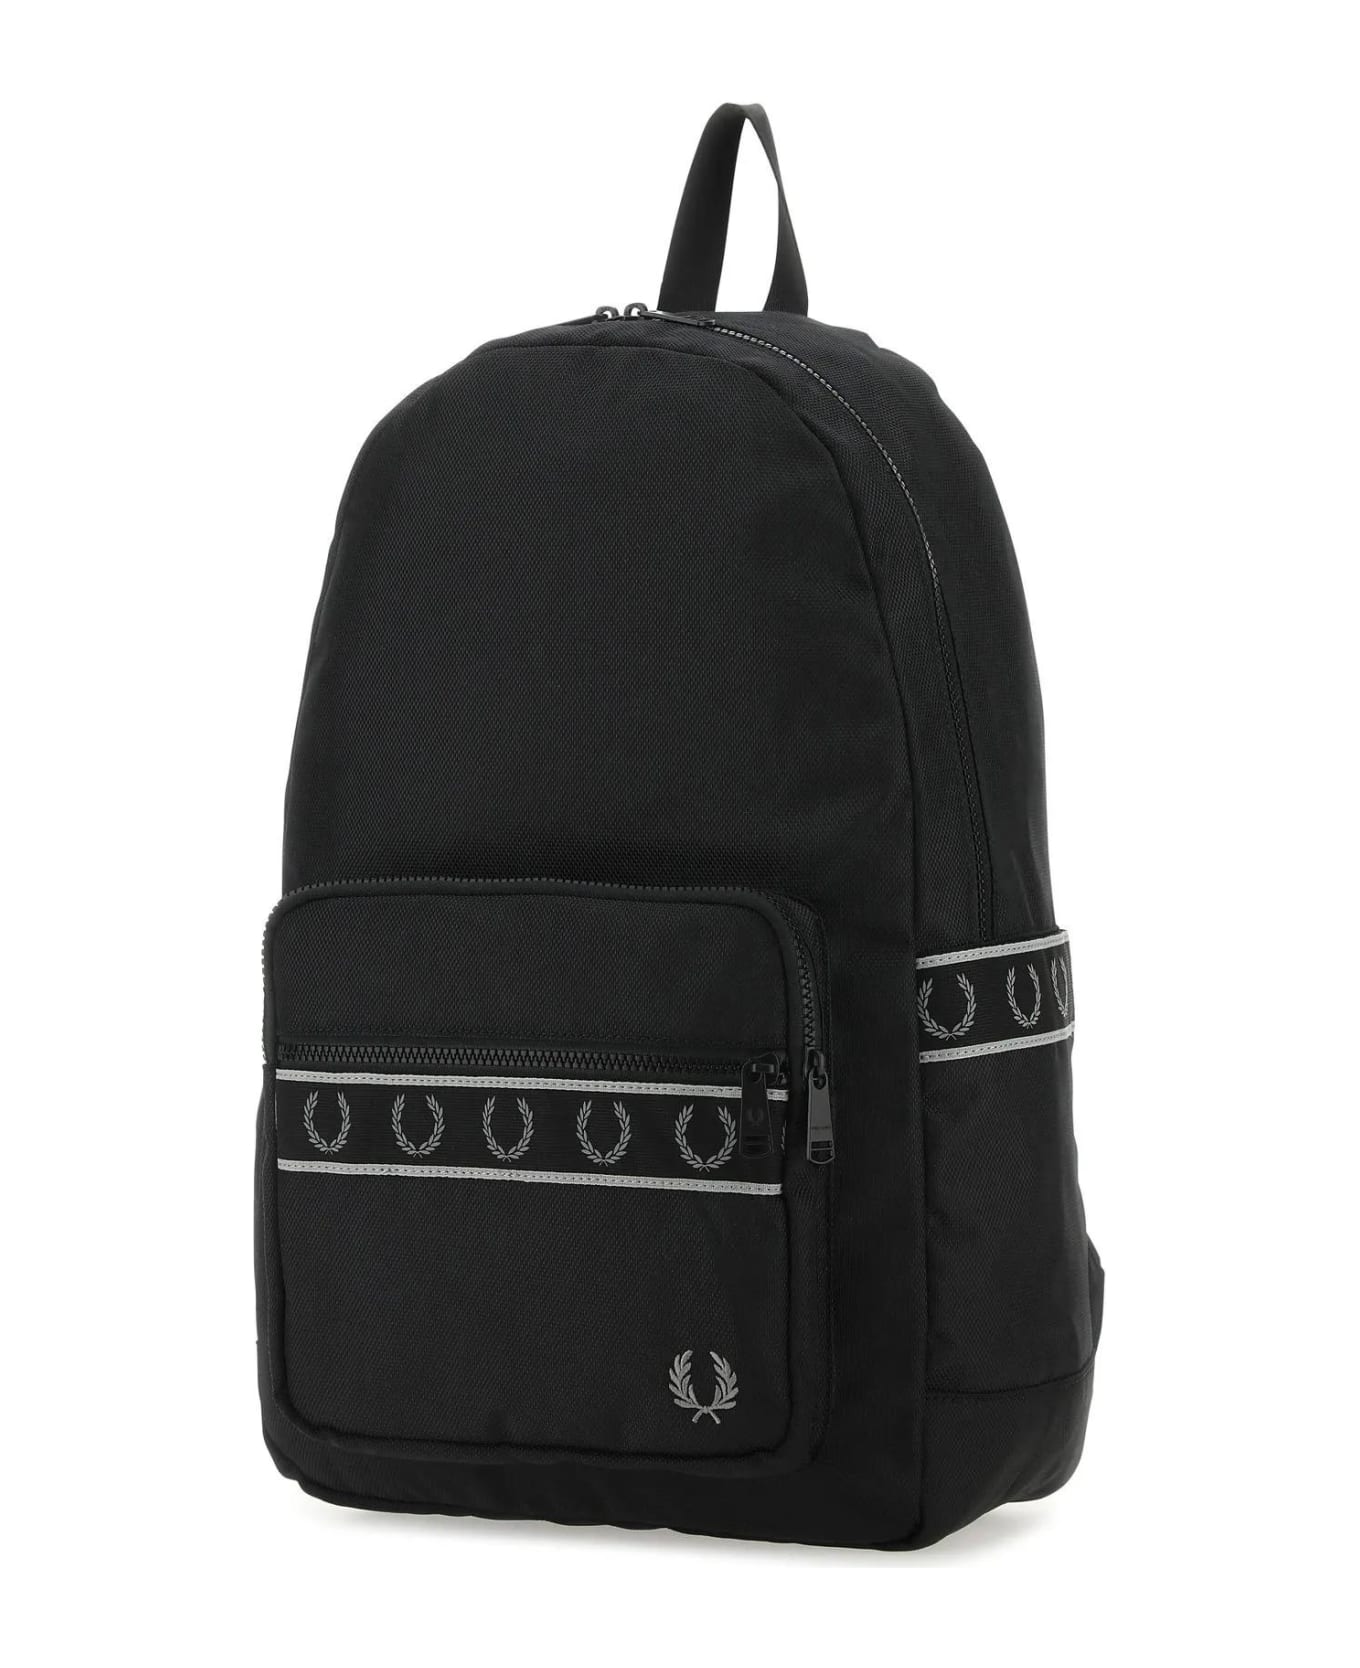 Fred Perry Black Polyester Backpack - Black